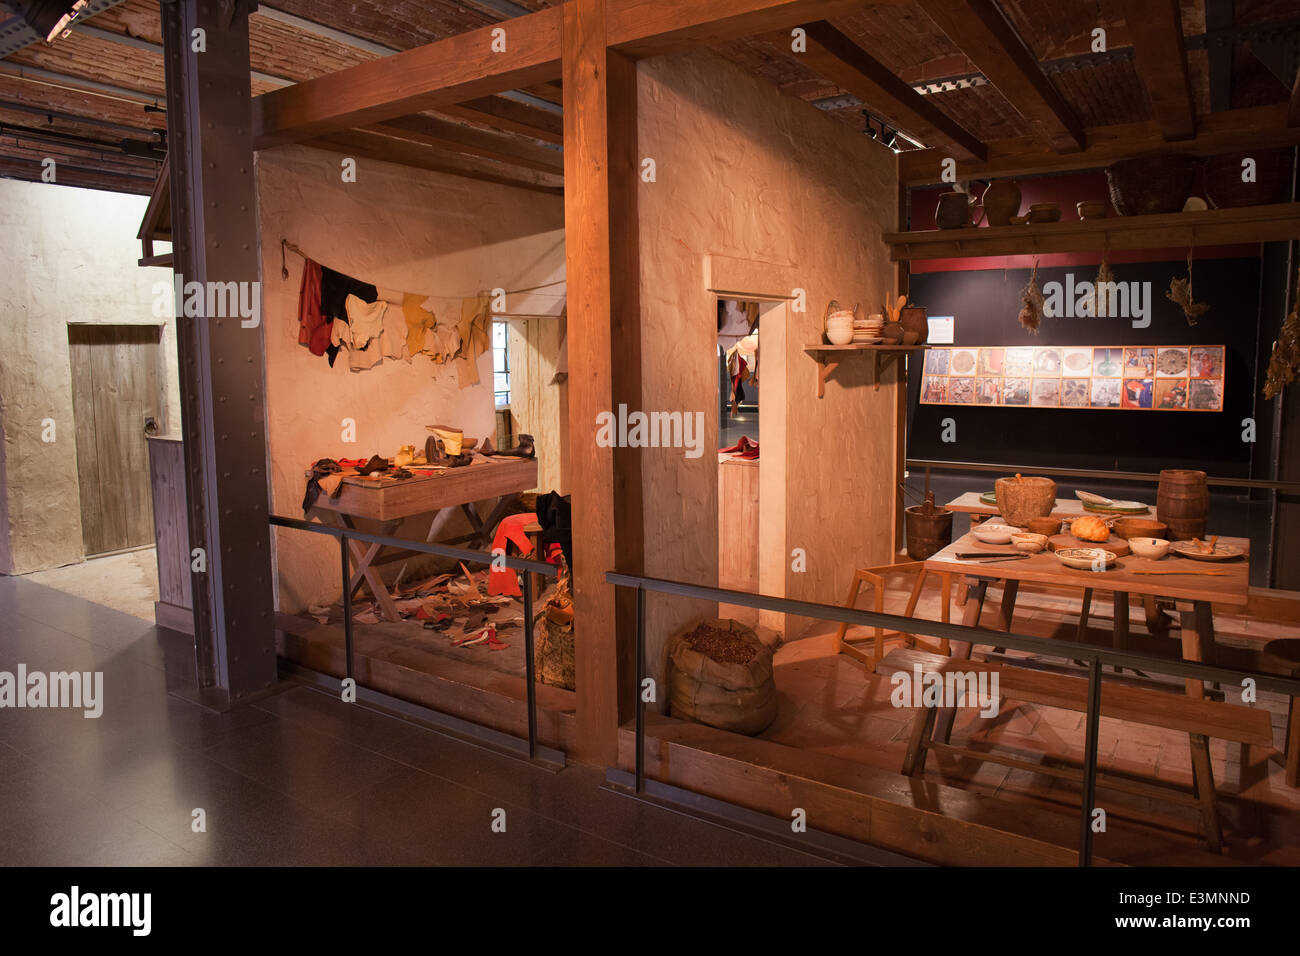 Shoemaker home and workshop, exhibition in Museum of the History of Catalonia in Barcelona, Spain. Stock Photo